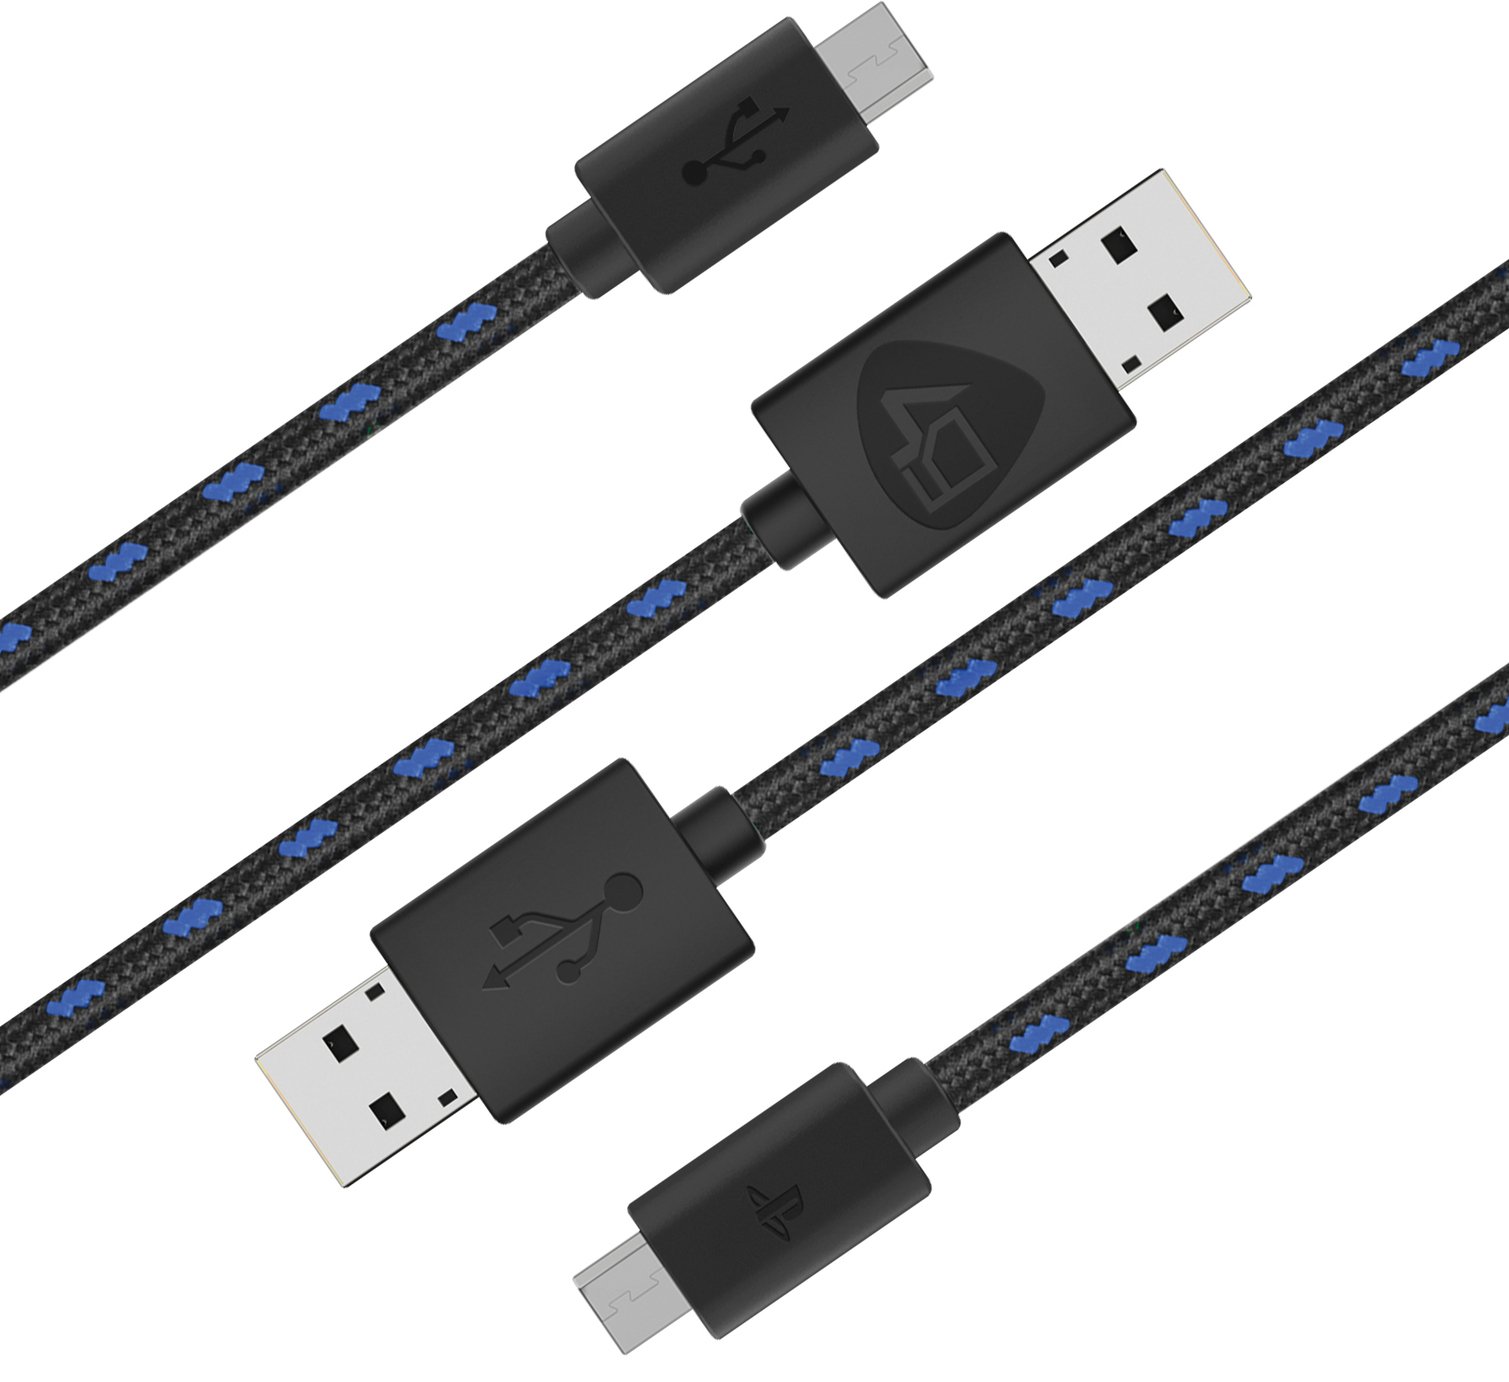 ps4 power cable argos